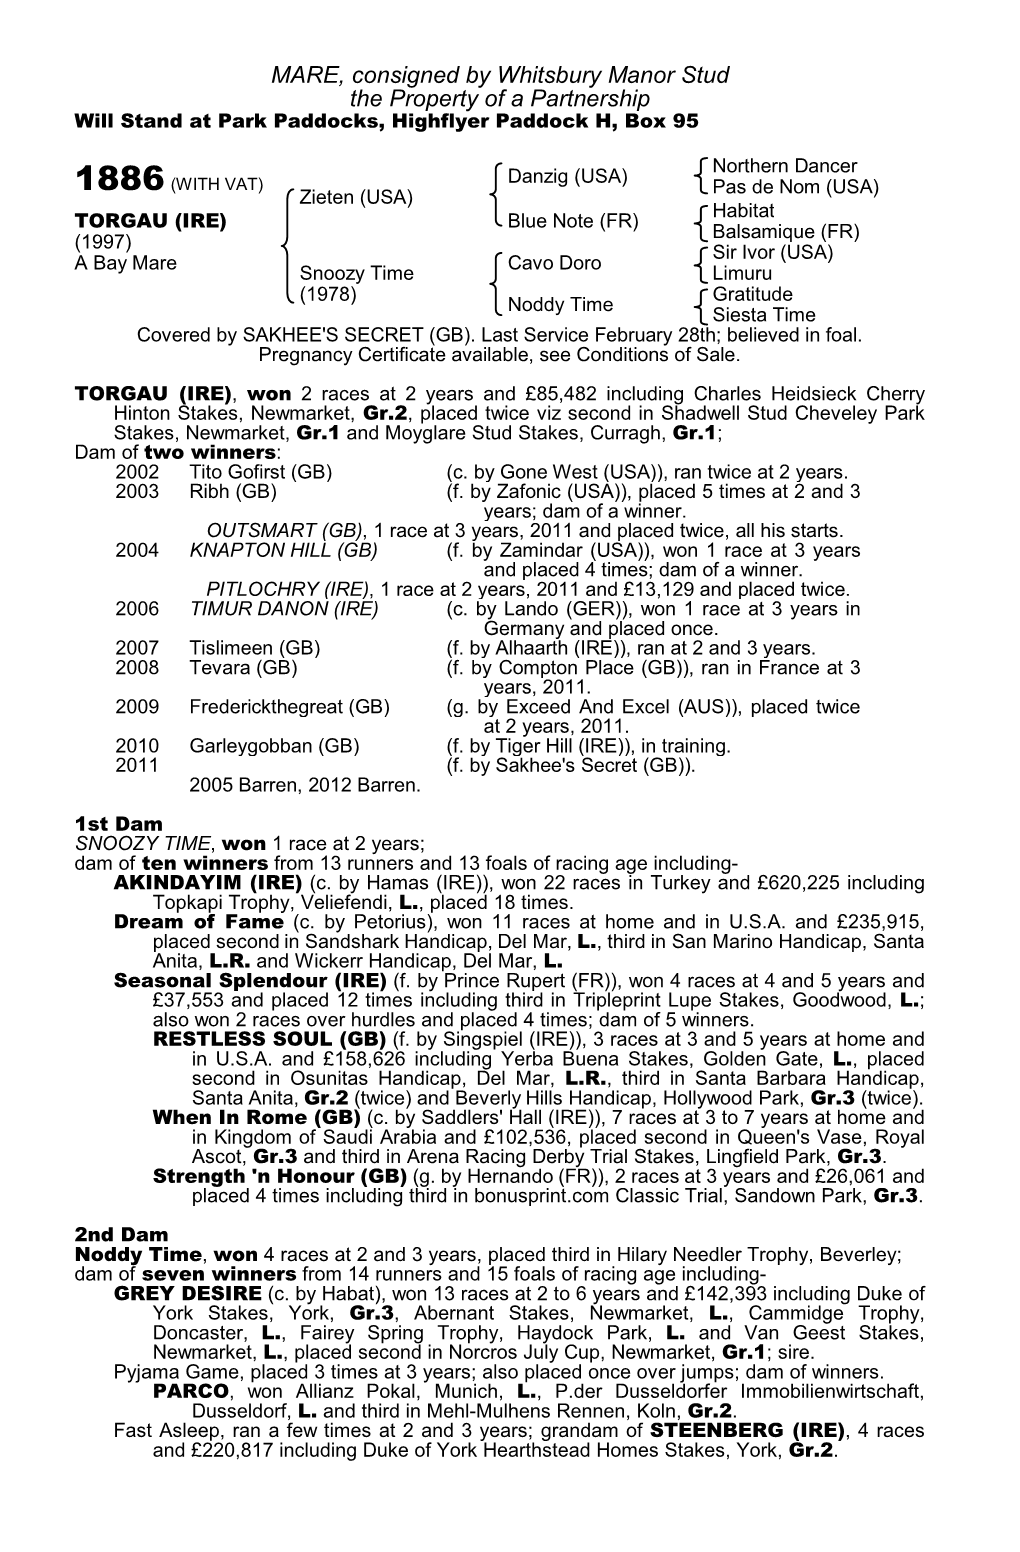 MARE, Consigned by Whitsbury Manor Stud the Property of a Partnership Will Stand at Park Paddocks, Highflyer Paddock H, Box 95